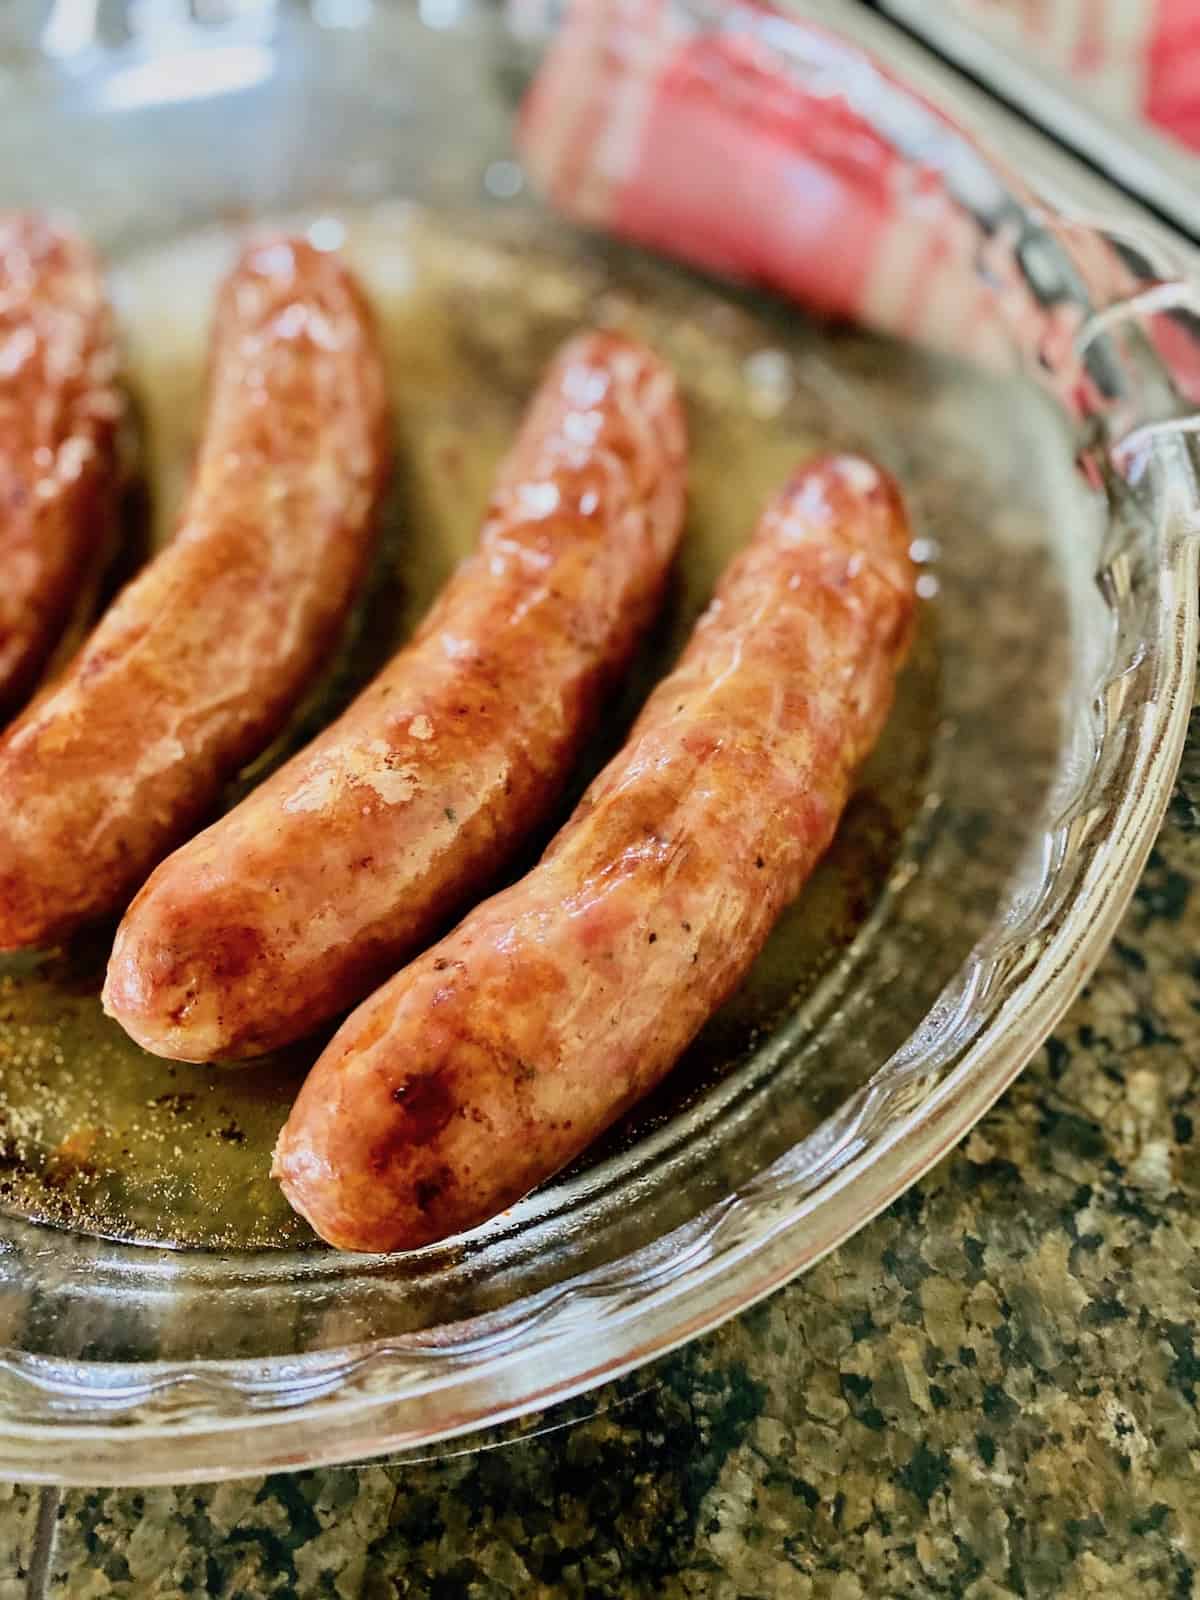 brats are brown and done baking in the glass dish